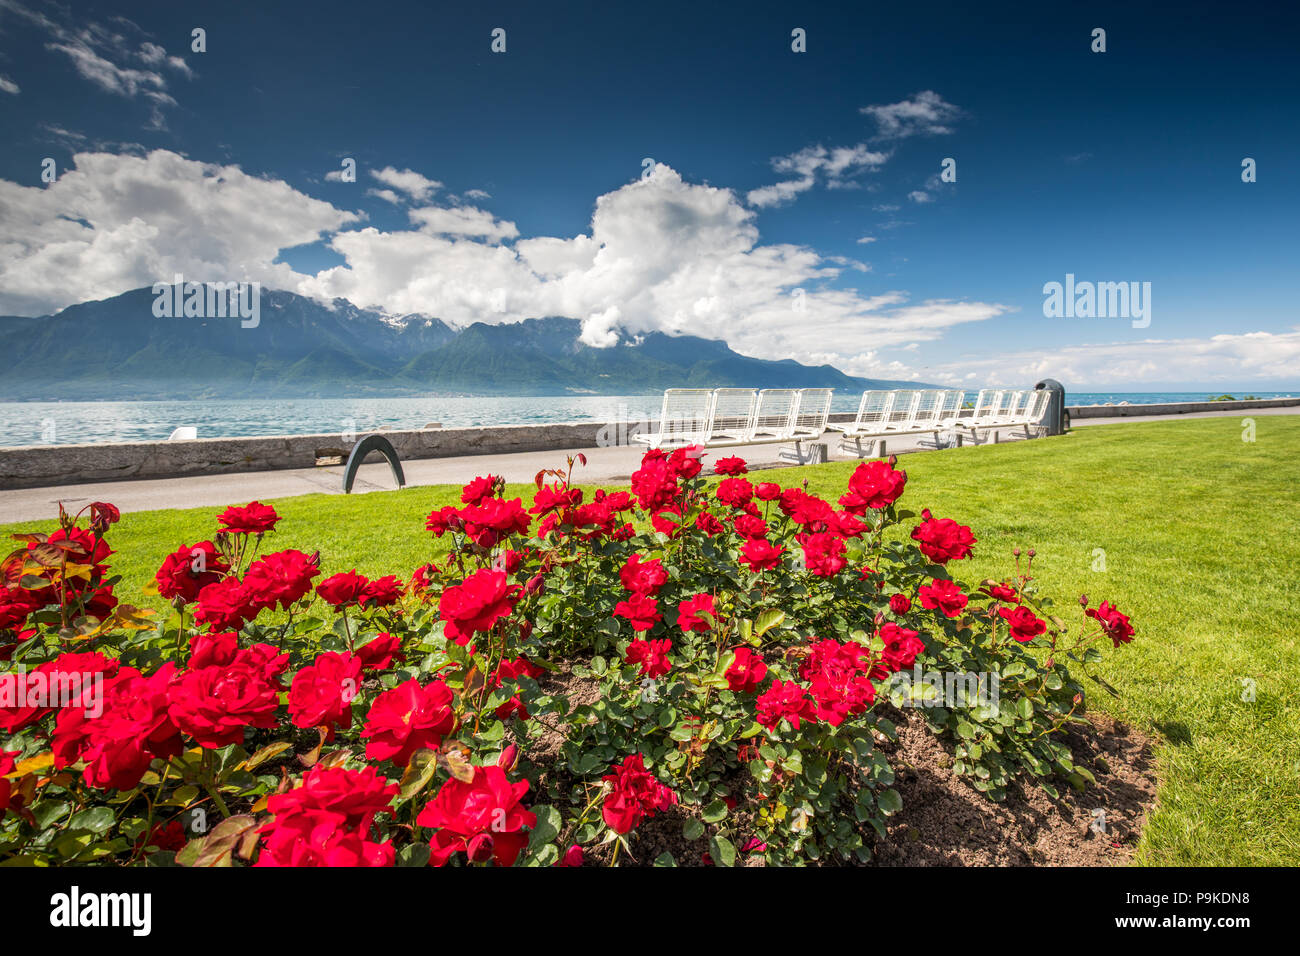 Seaside promenade in Vevey town near Montreux with Swiss Alps in background, Switzerland, Europe. Stock Photo